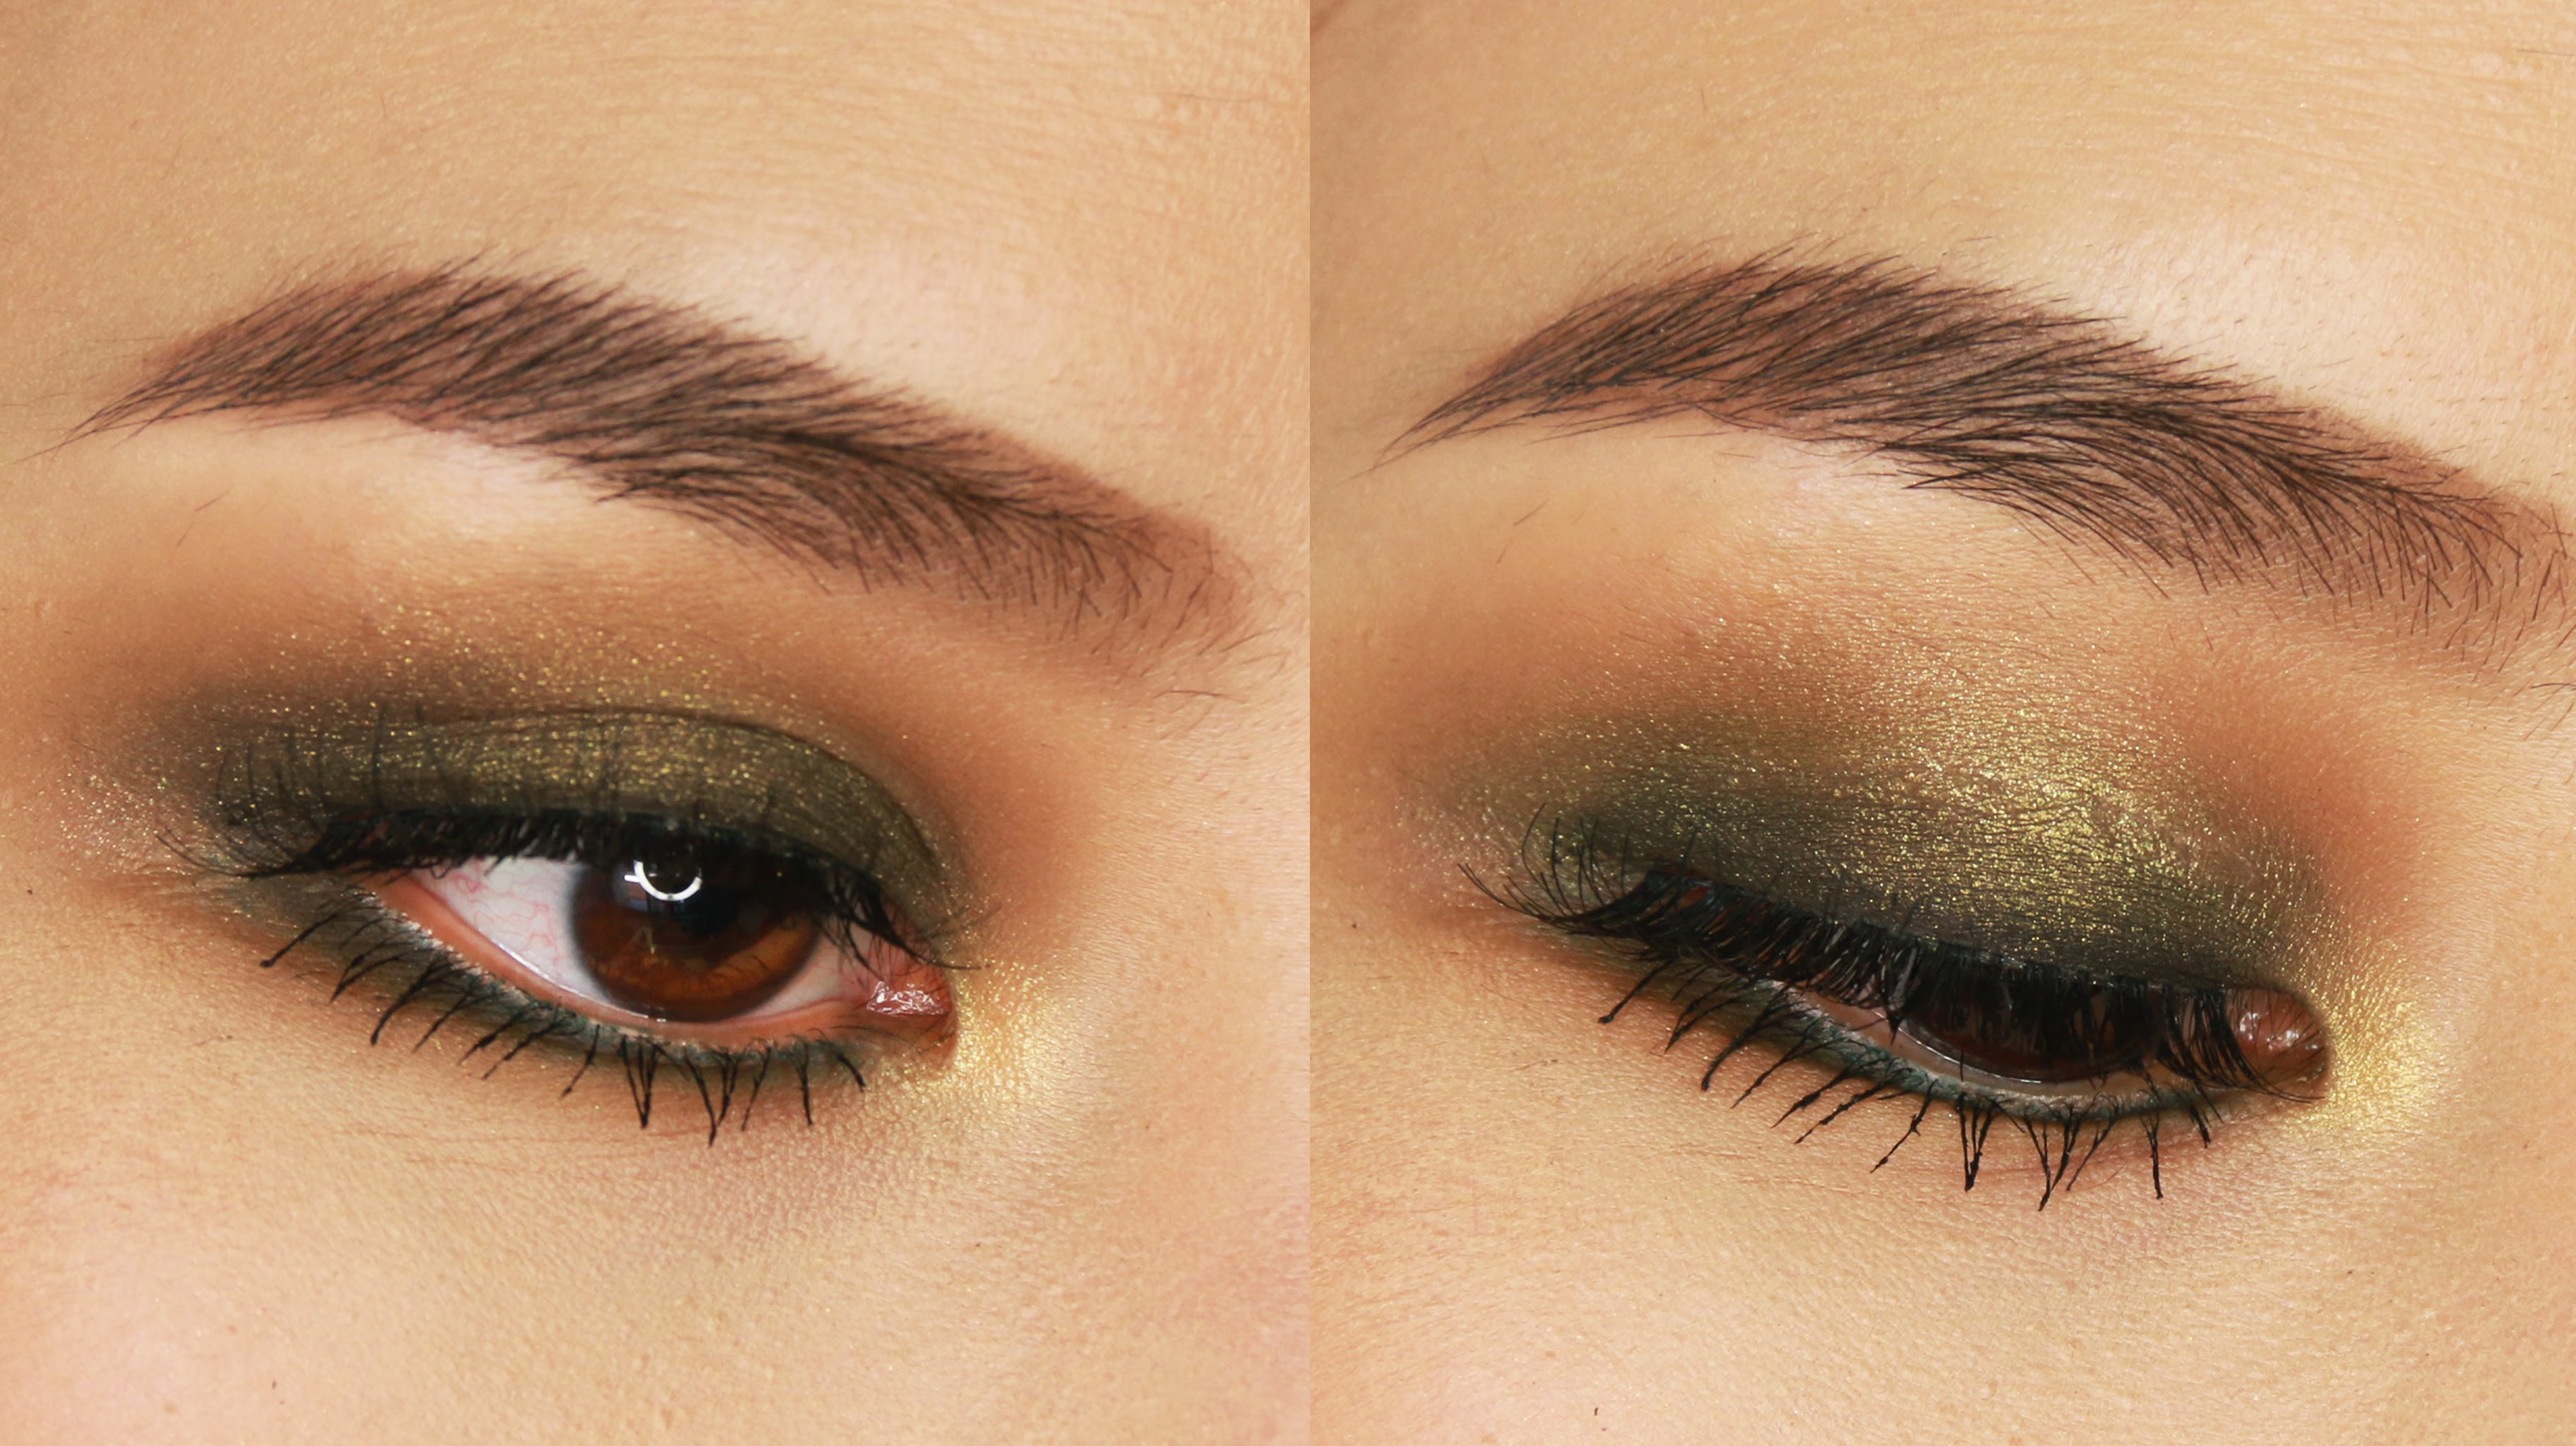 Green Eye Makeup 5 Minute Green Smokey Eye Makeup Tutorial For Small Or Hooded Eyes